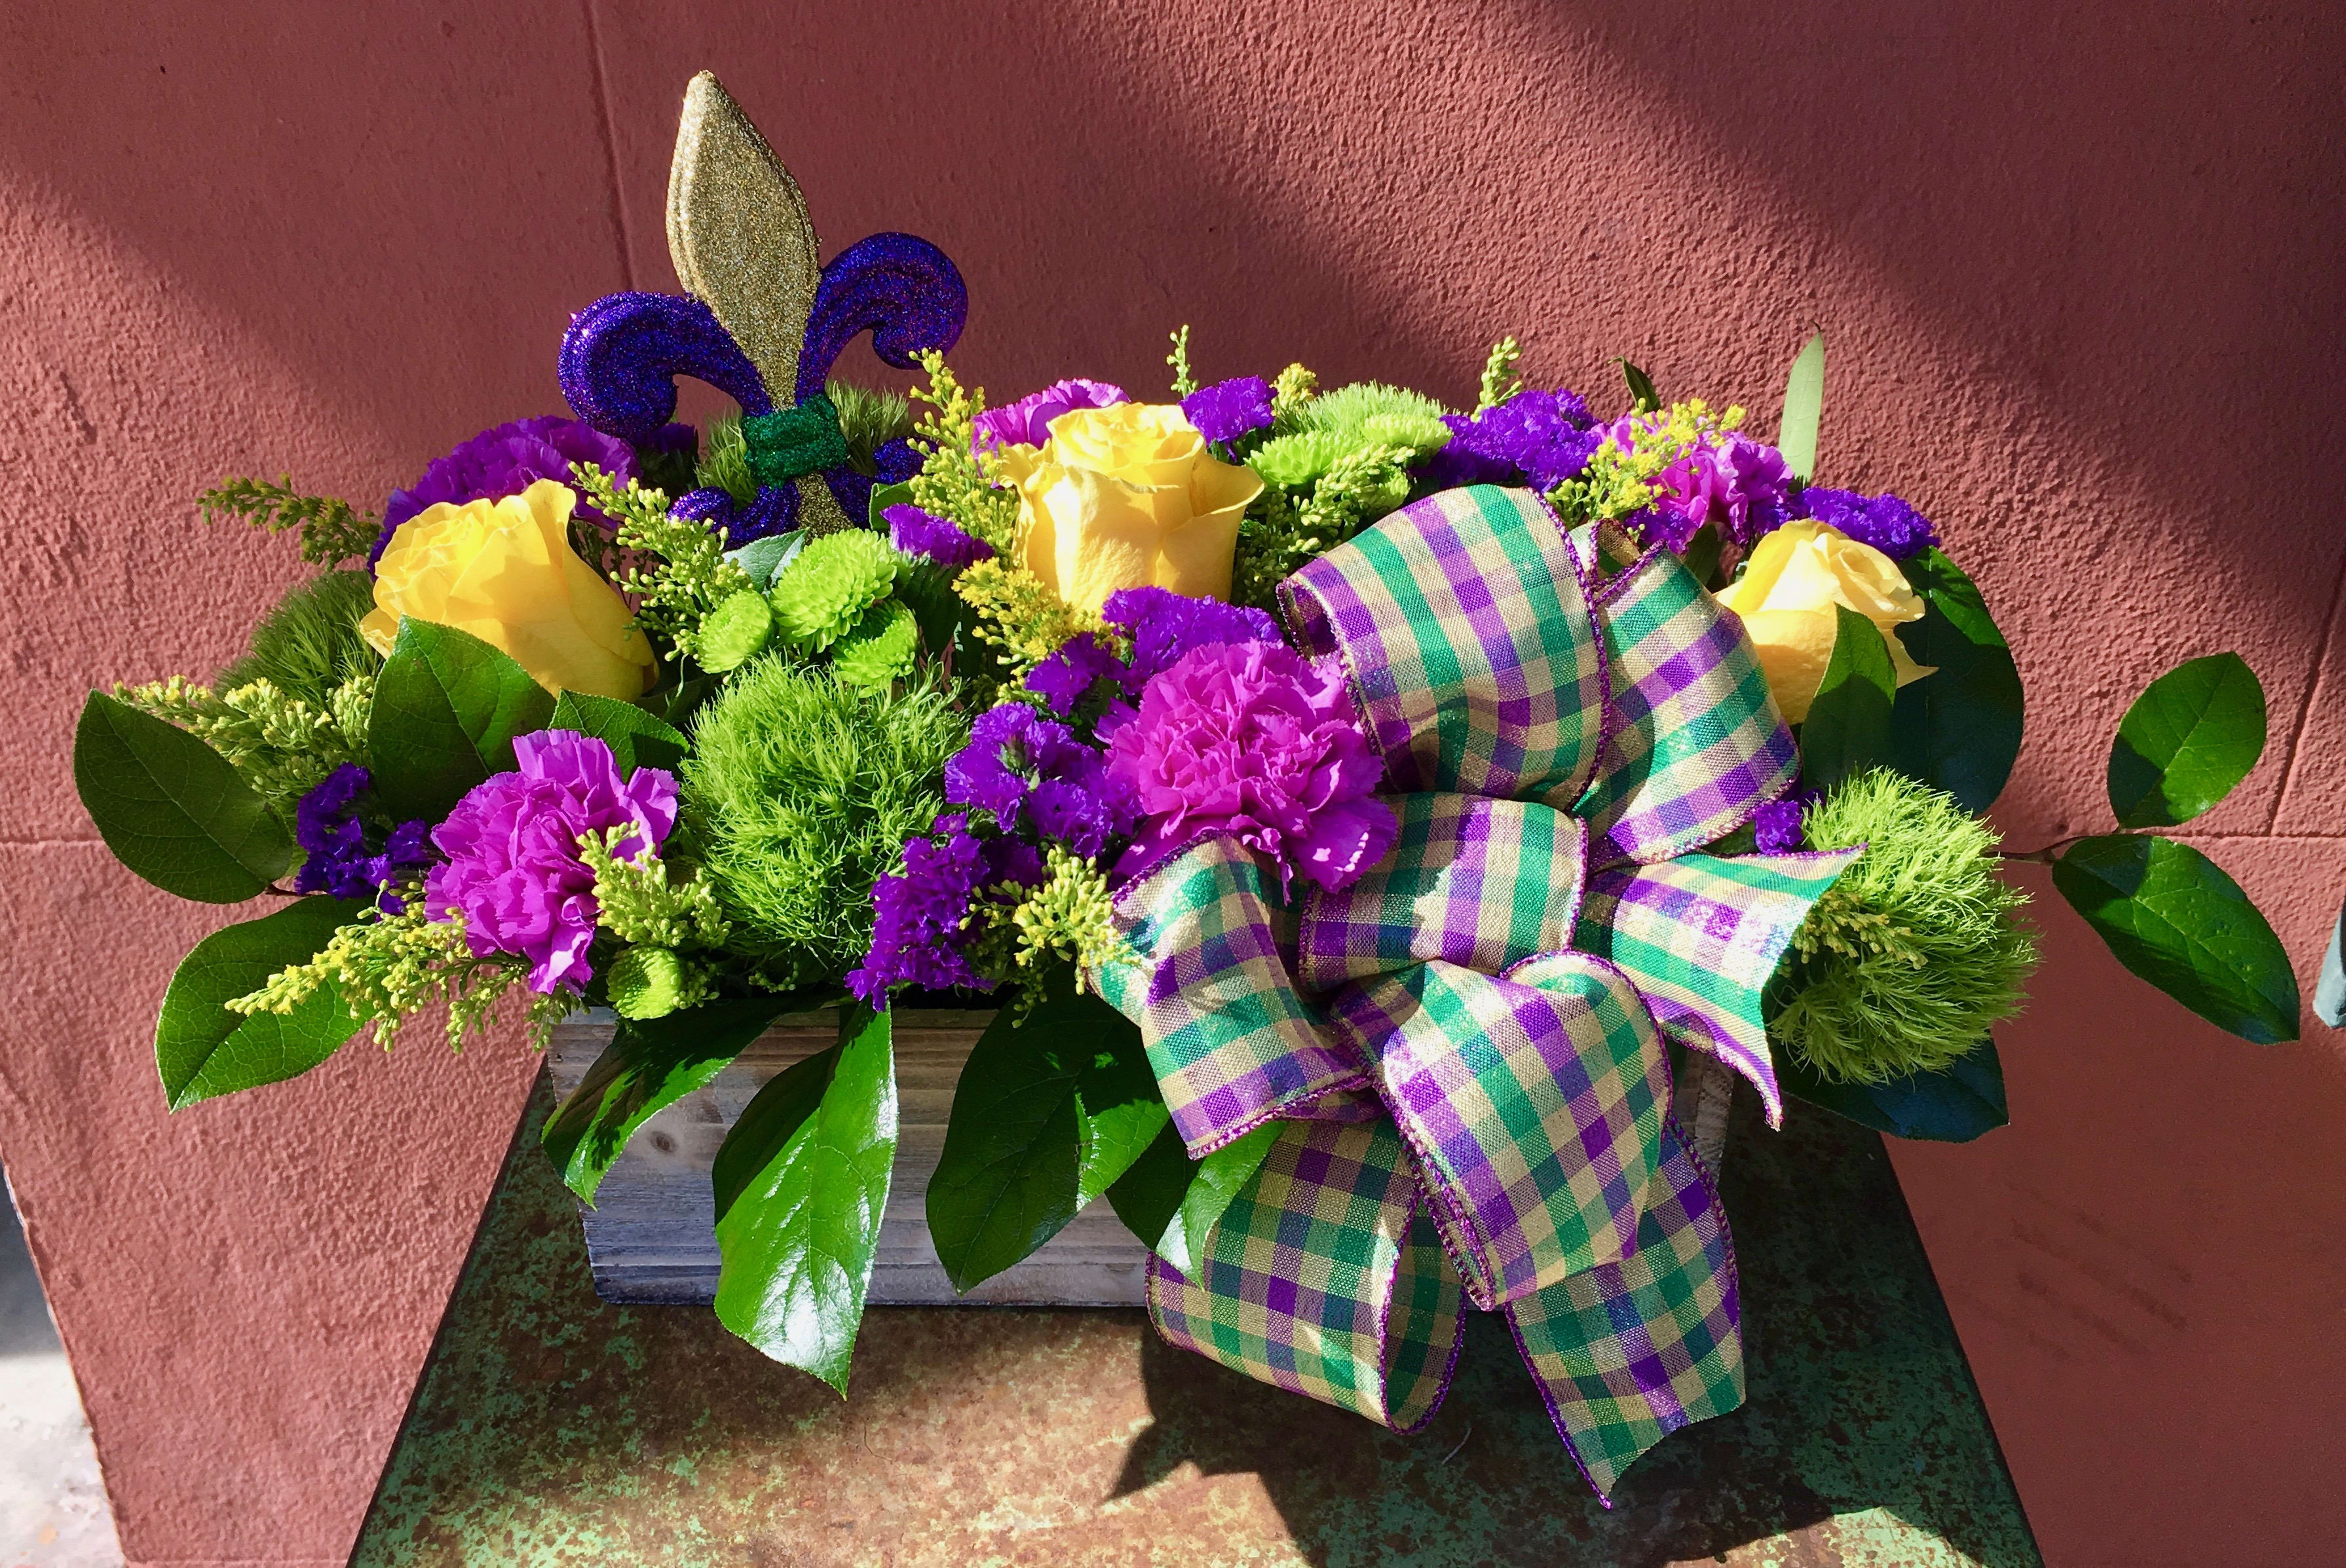 Let the Good Times Roll! - A classic mix of Mardi Gras colored blooms.